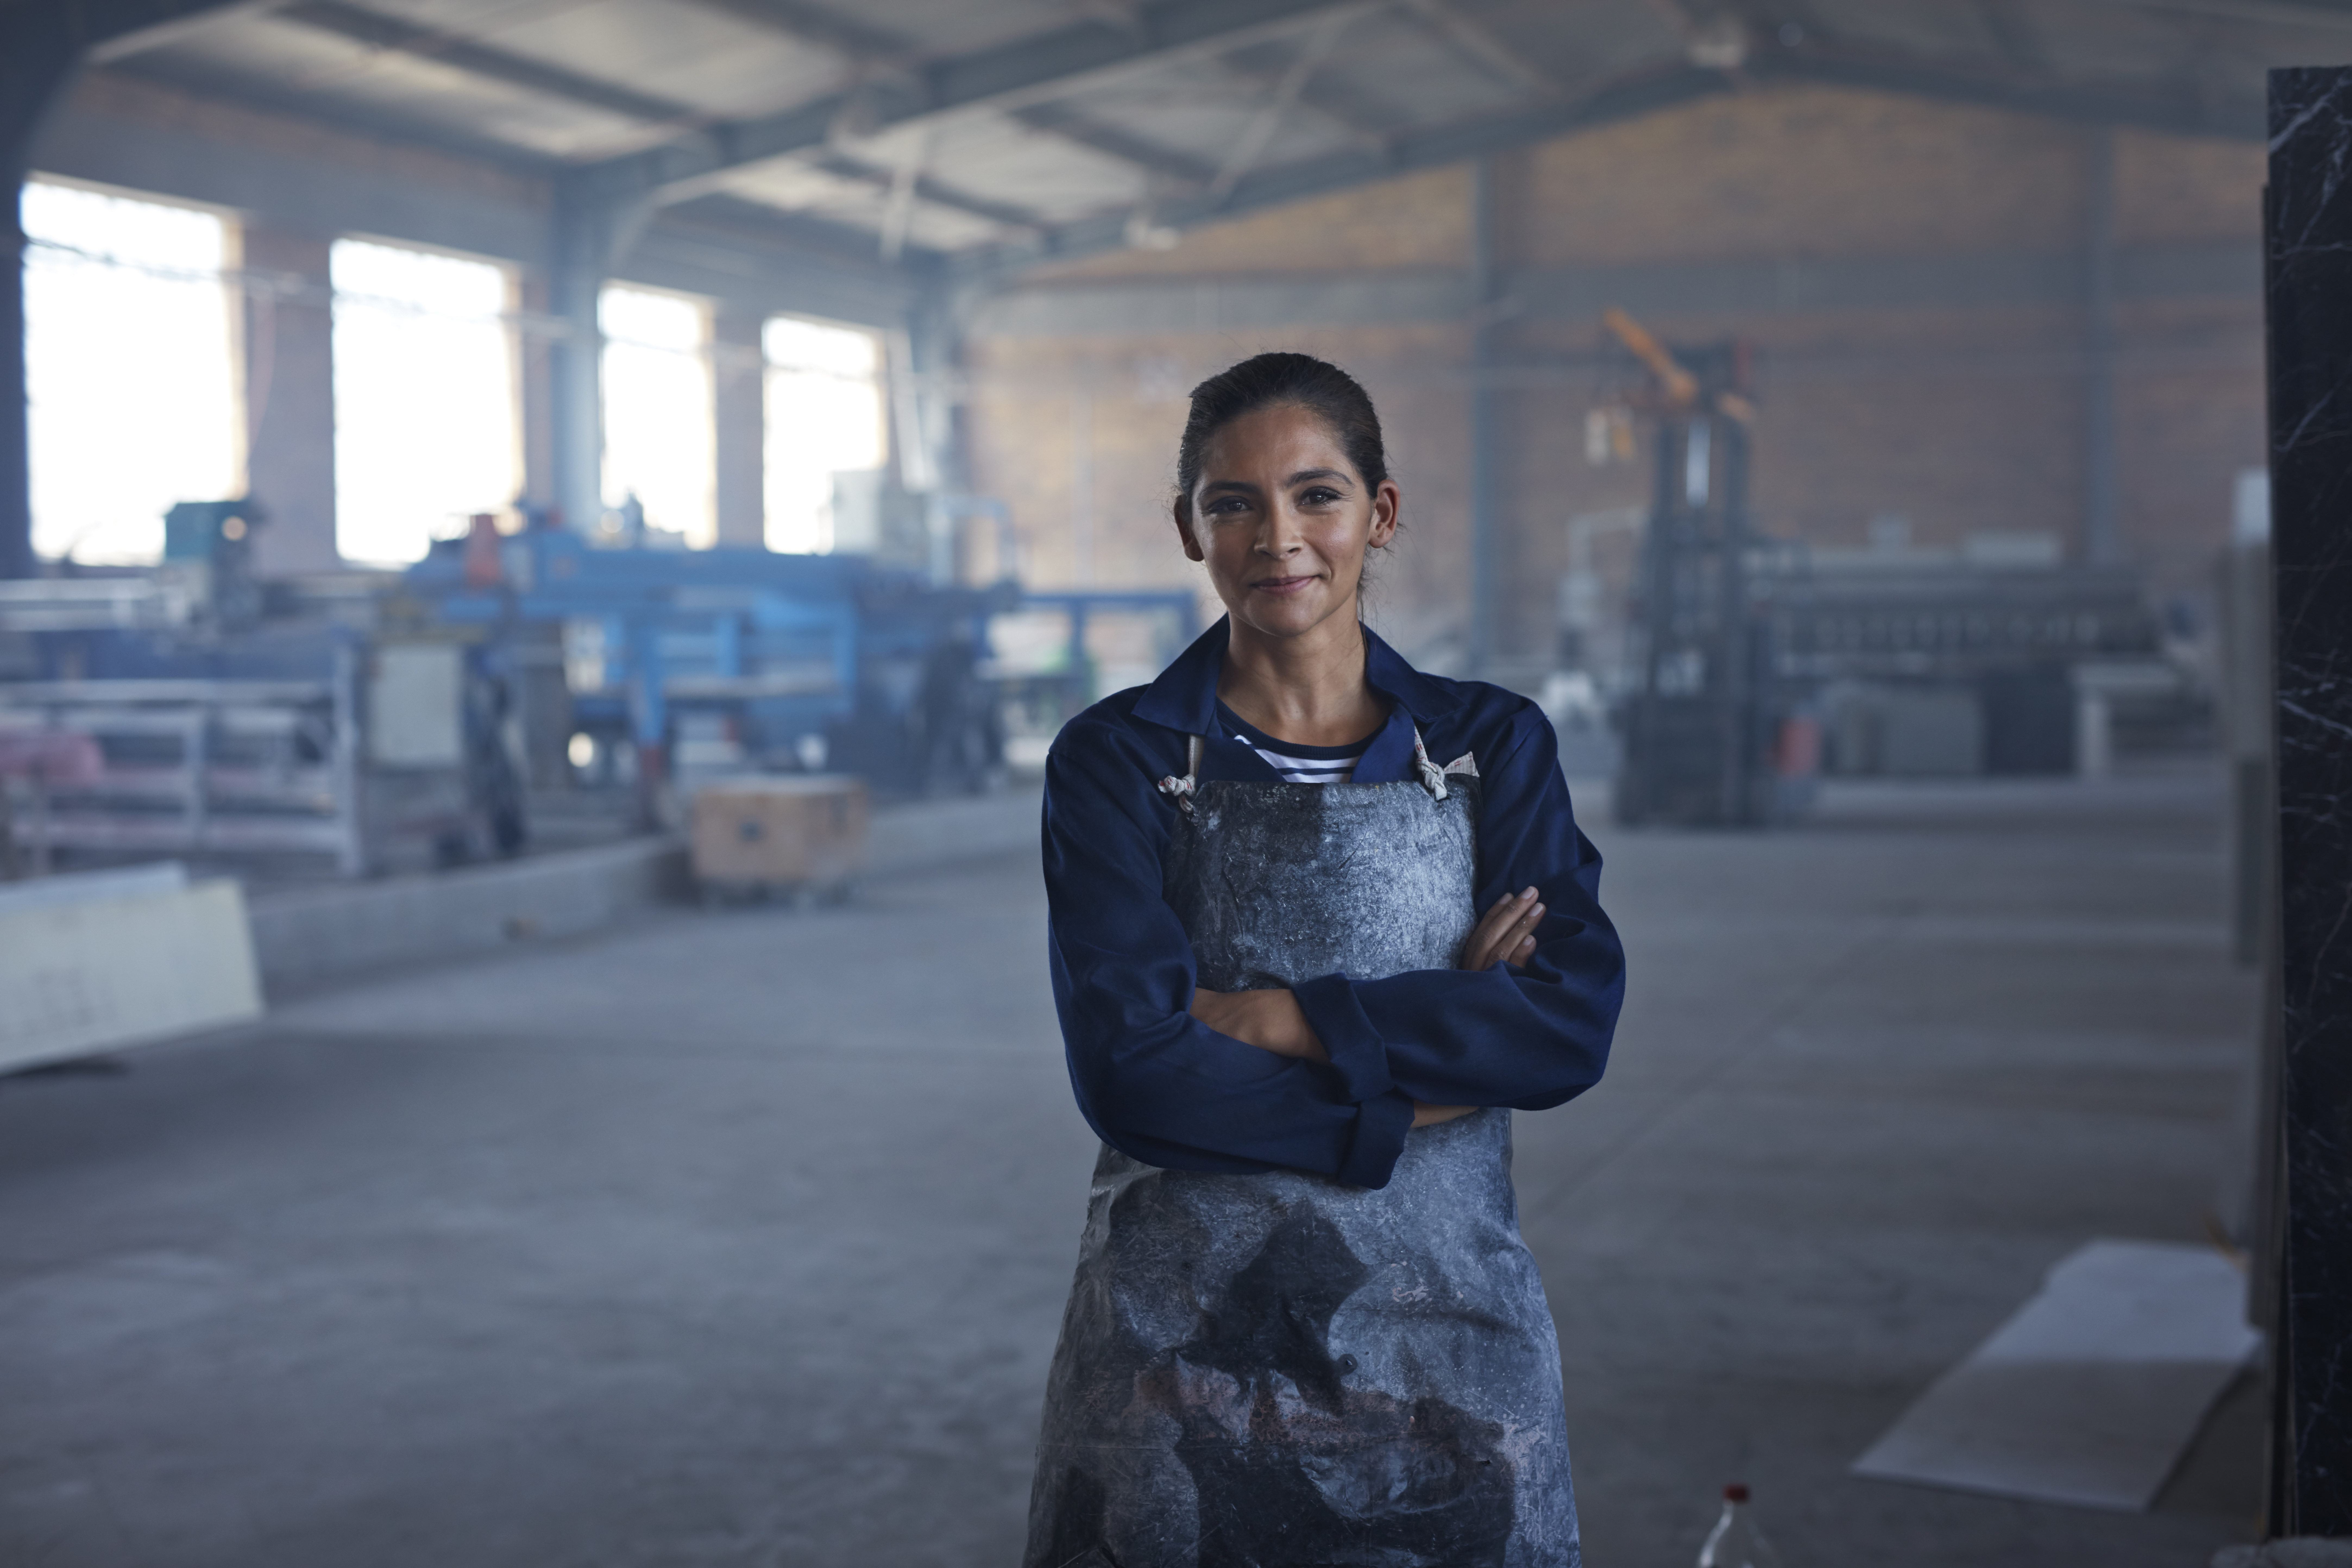 Woman wearing an apron in a warehouse